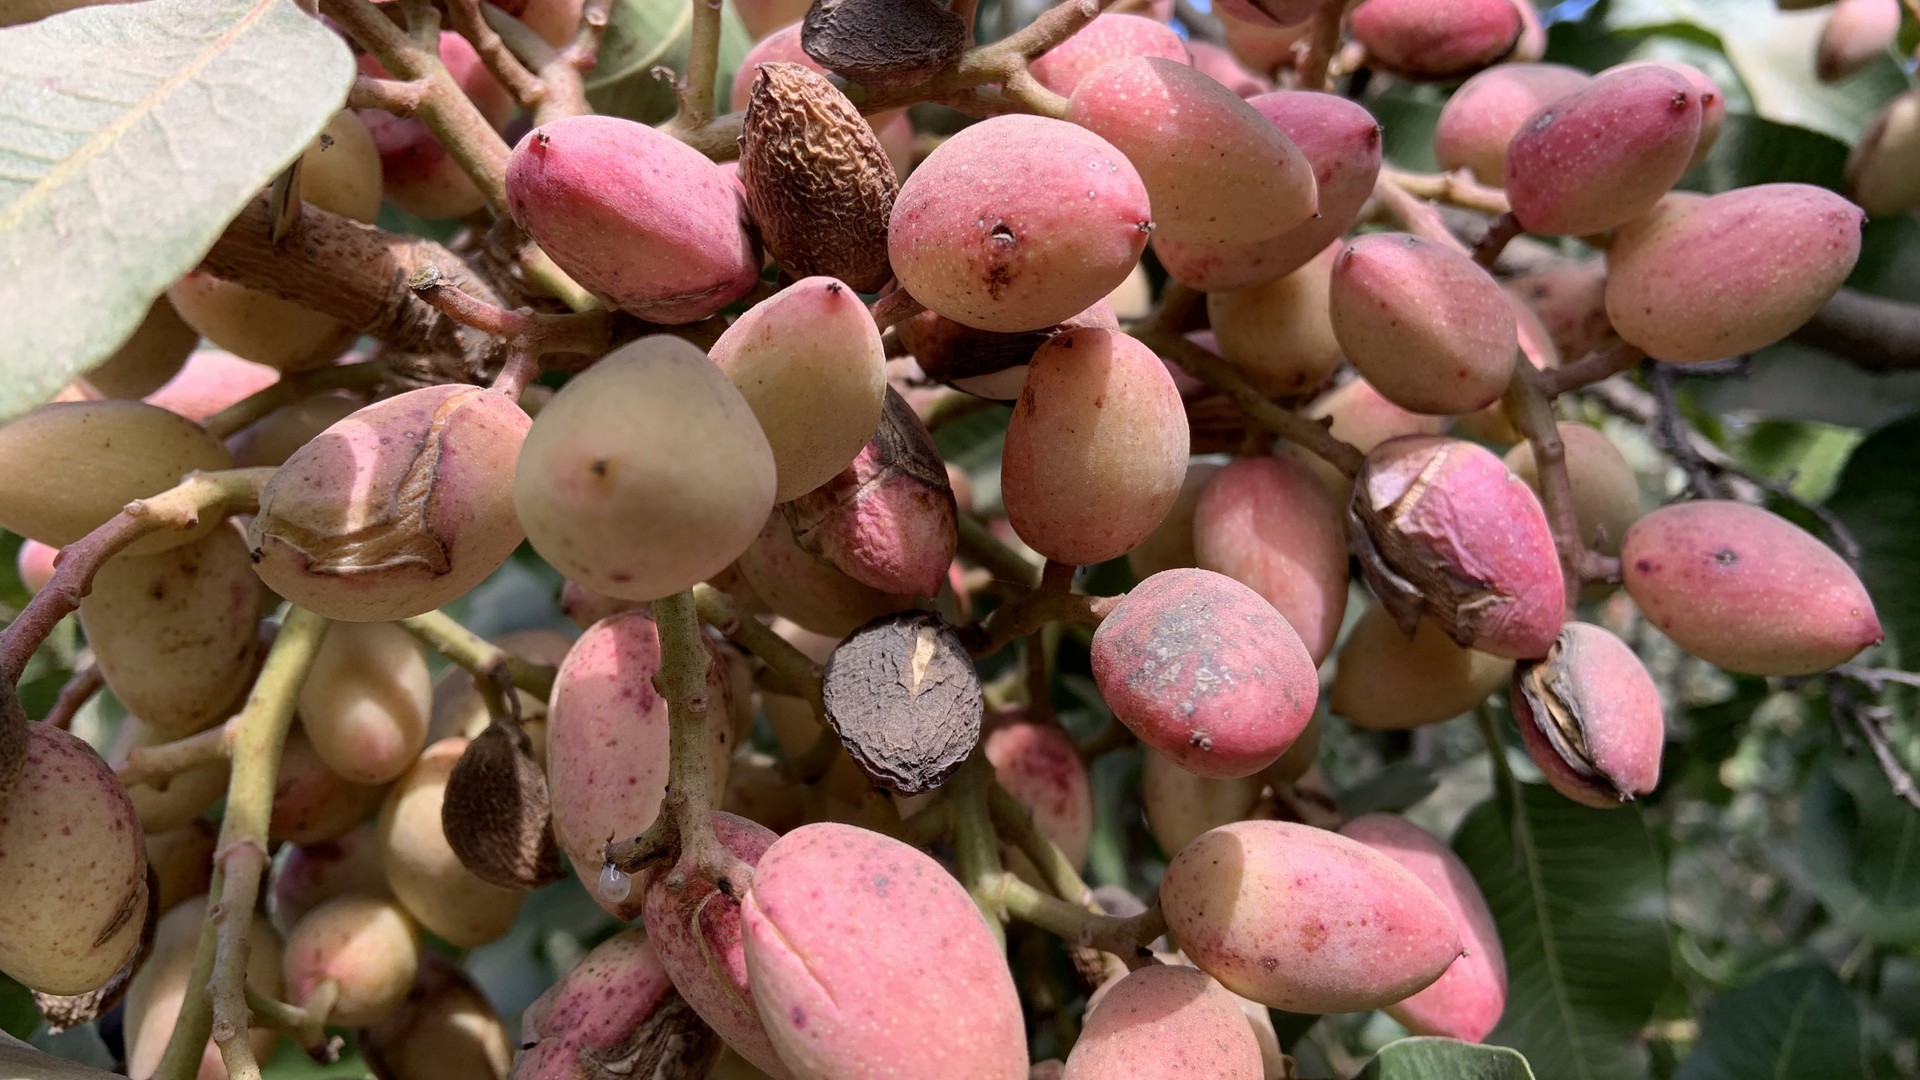 Pistachio Demand is Strong, But Acreage is Increasing